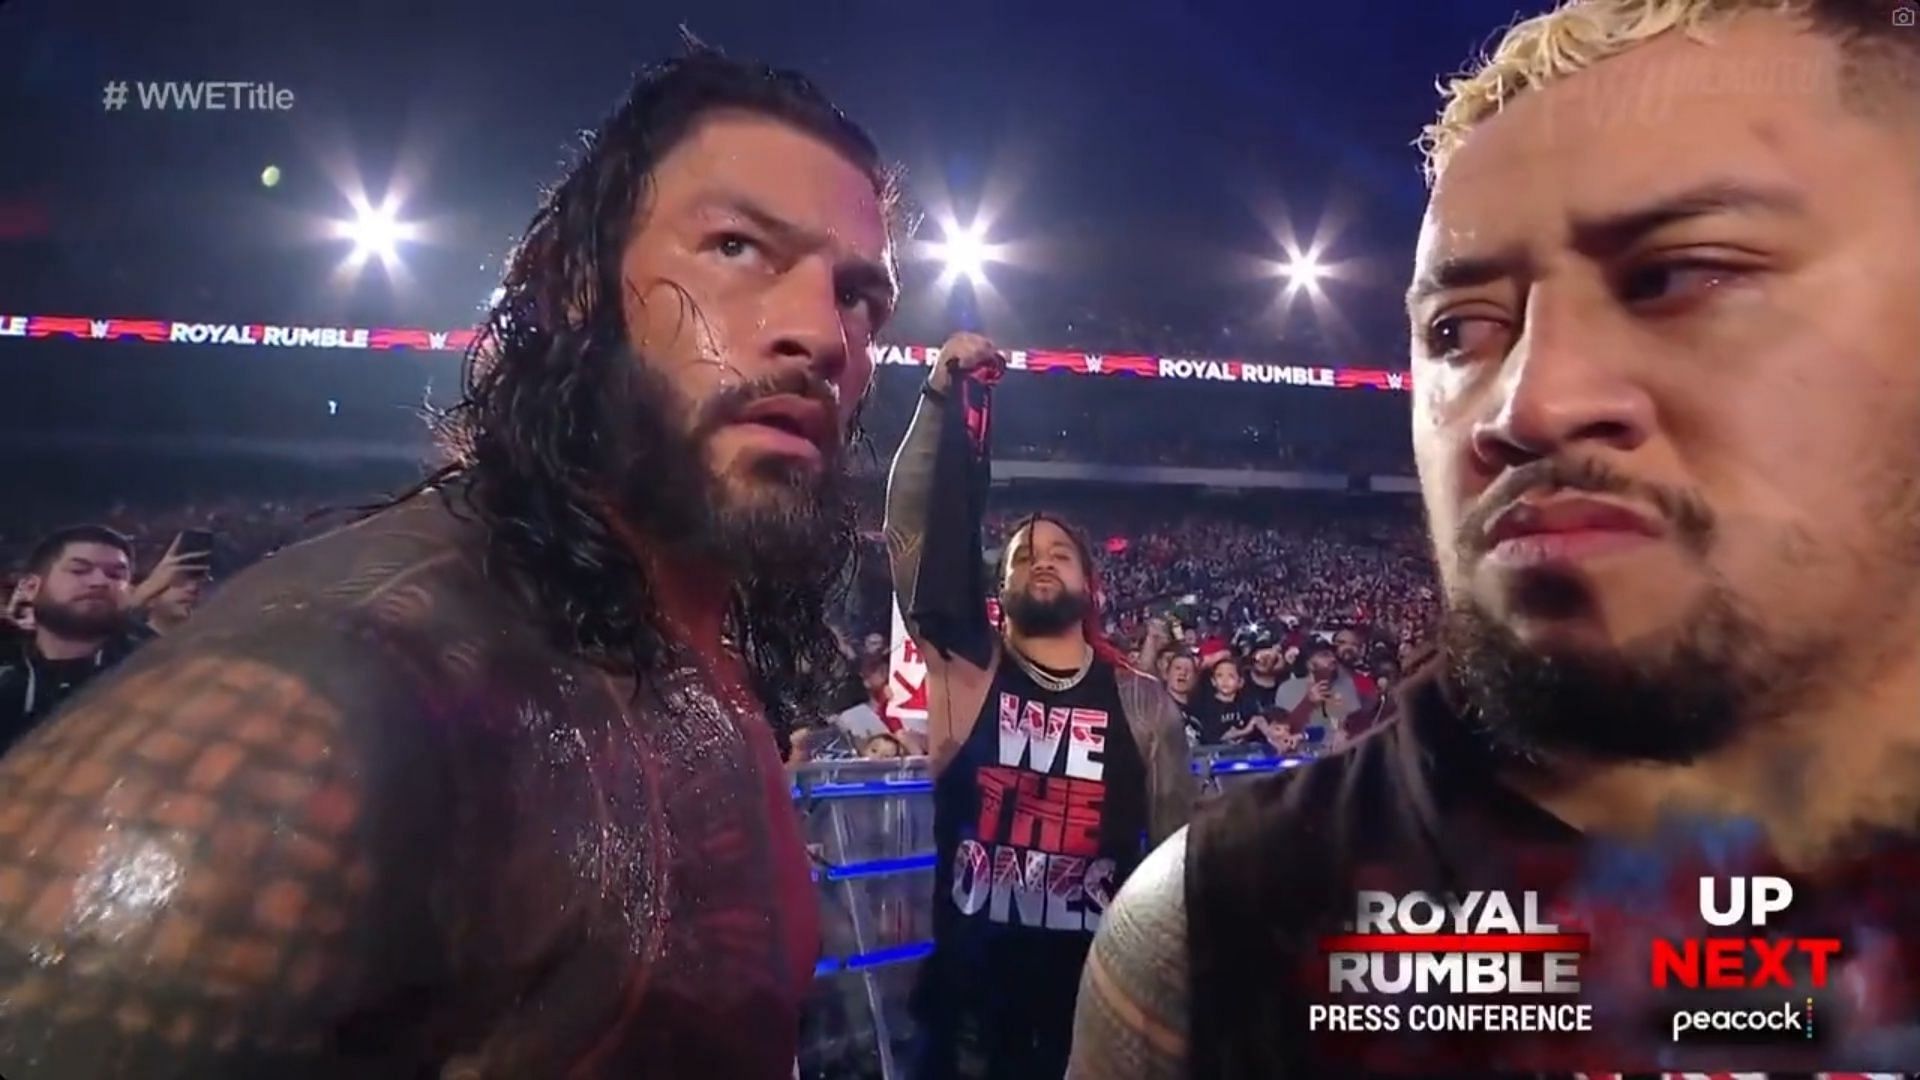 [WATCH] What Roman Reigns said to Solo Sikoa at the end of WWE Royal Rumble